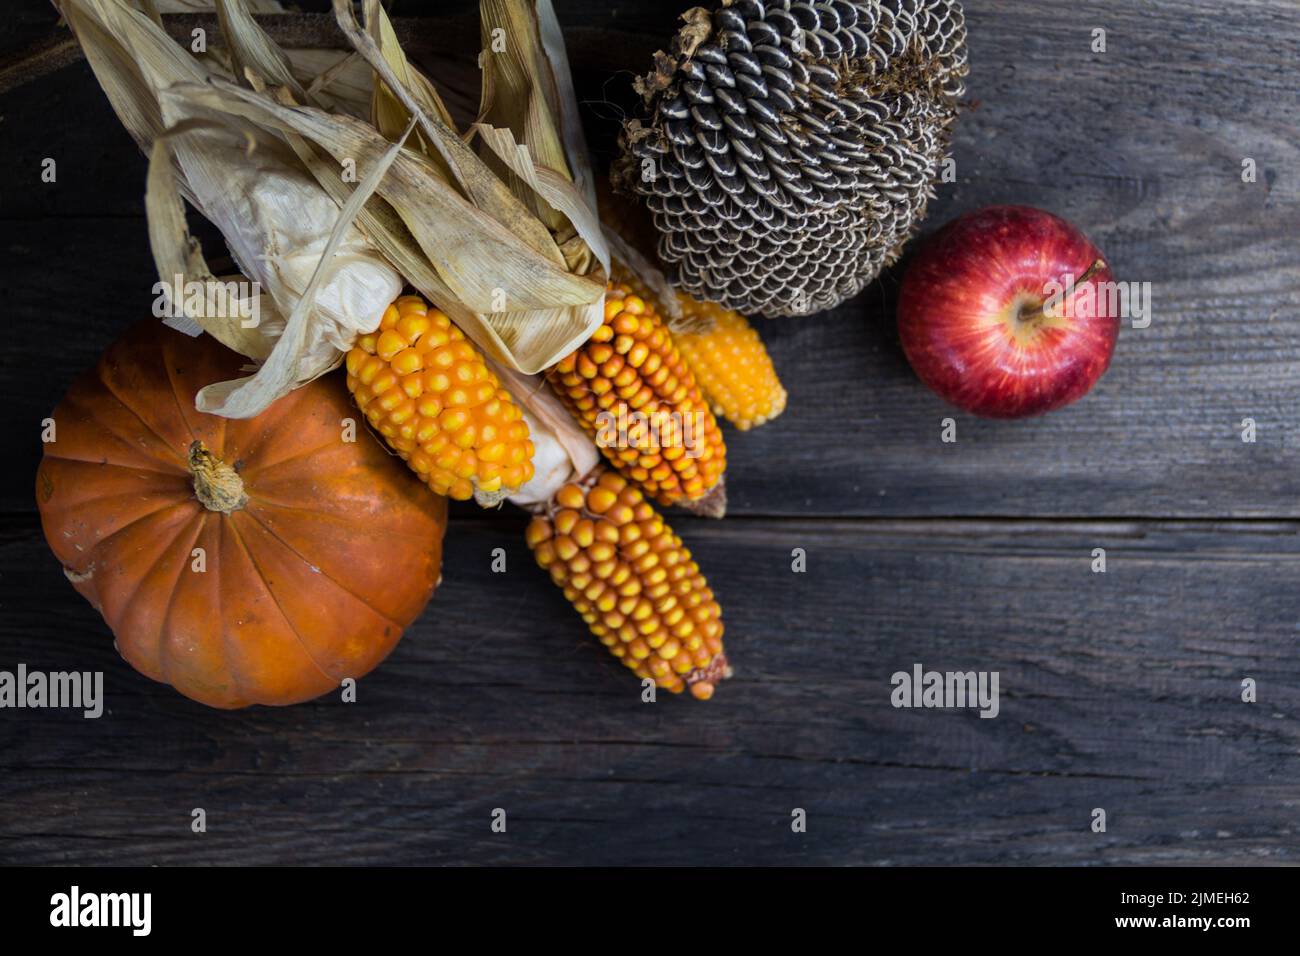 Top view of autumn harvest with place for text Stock Photo